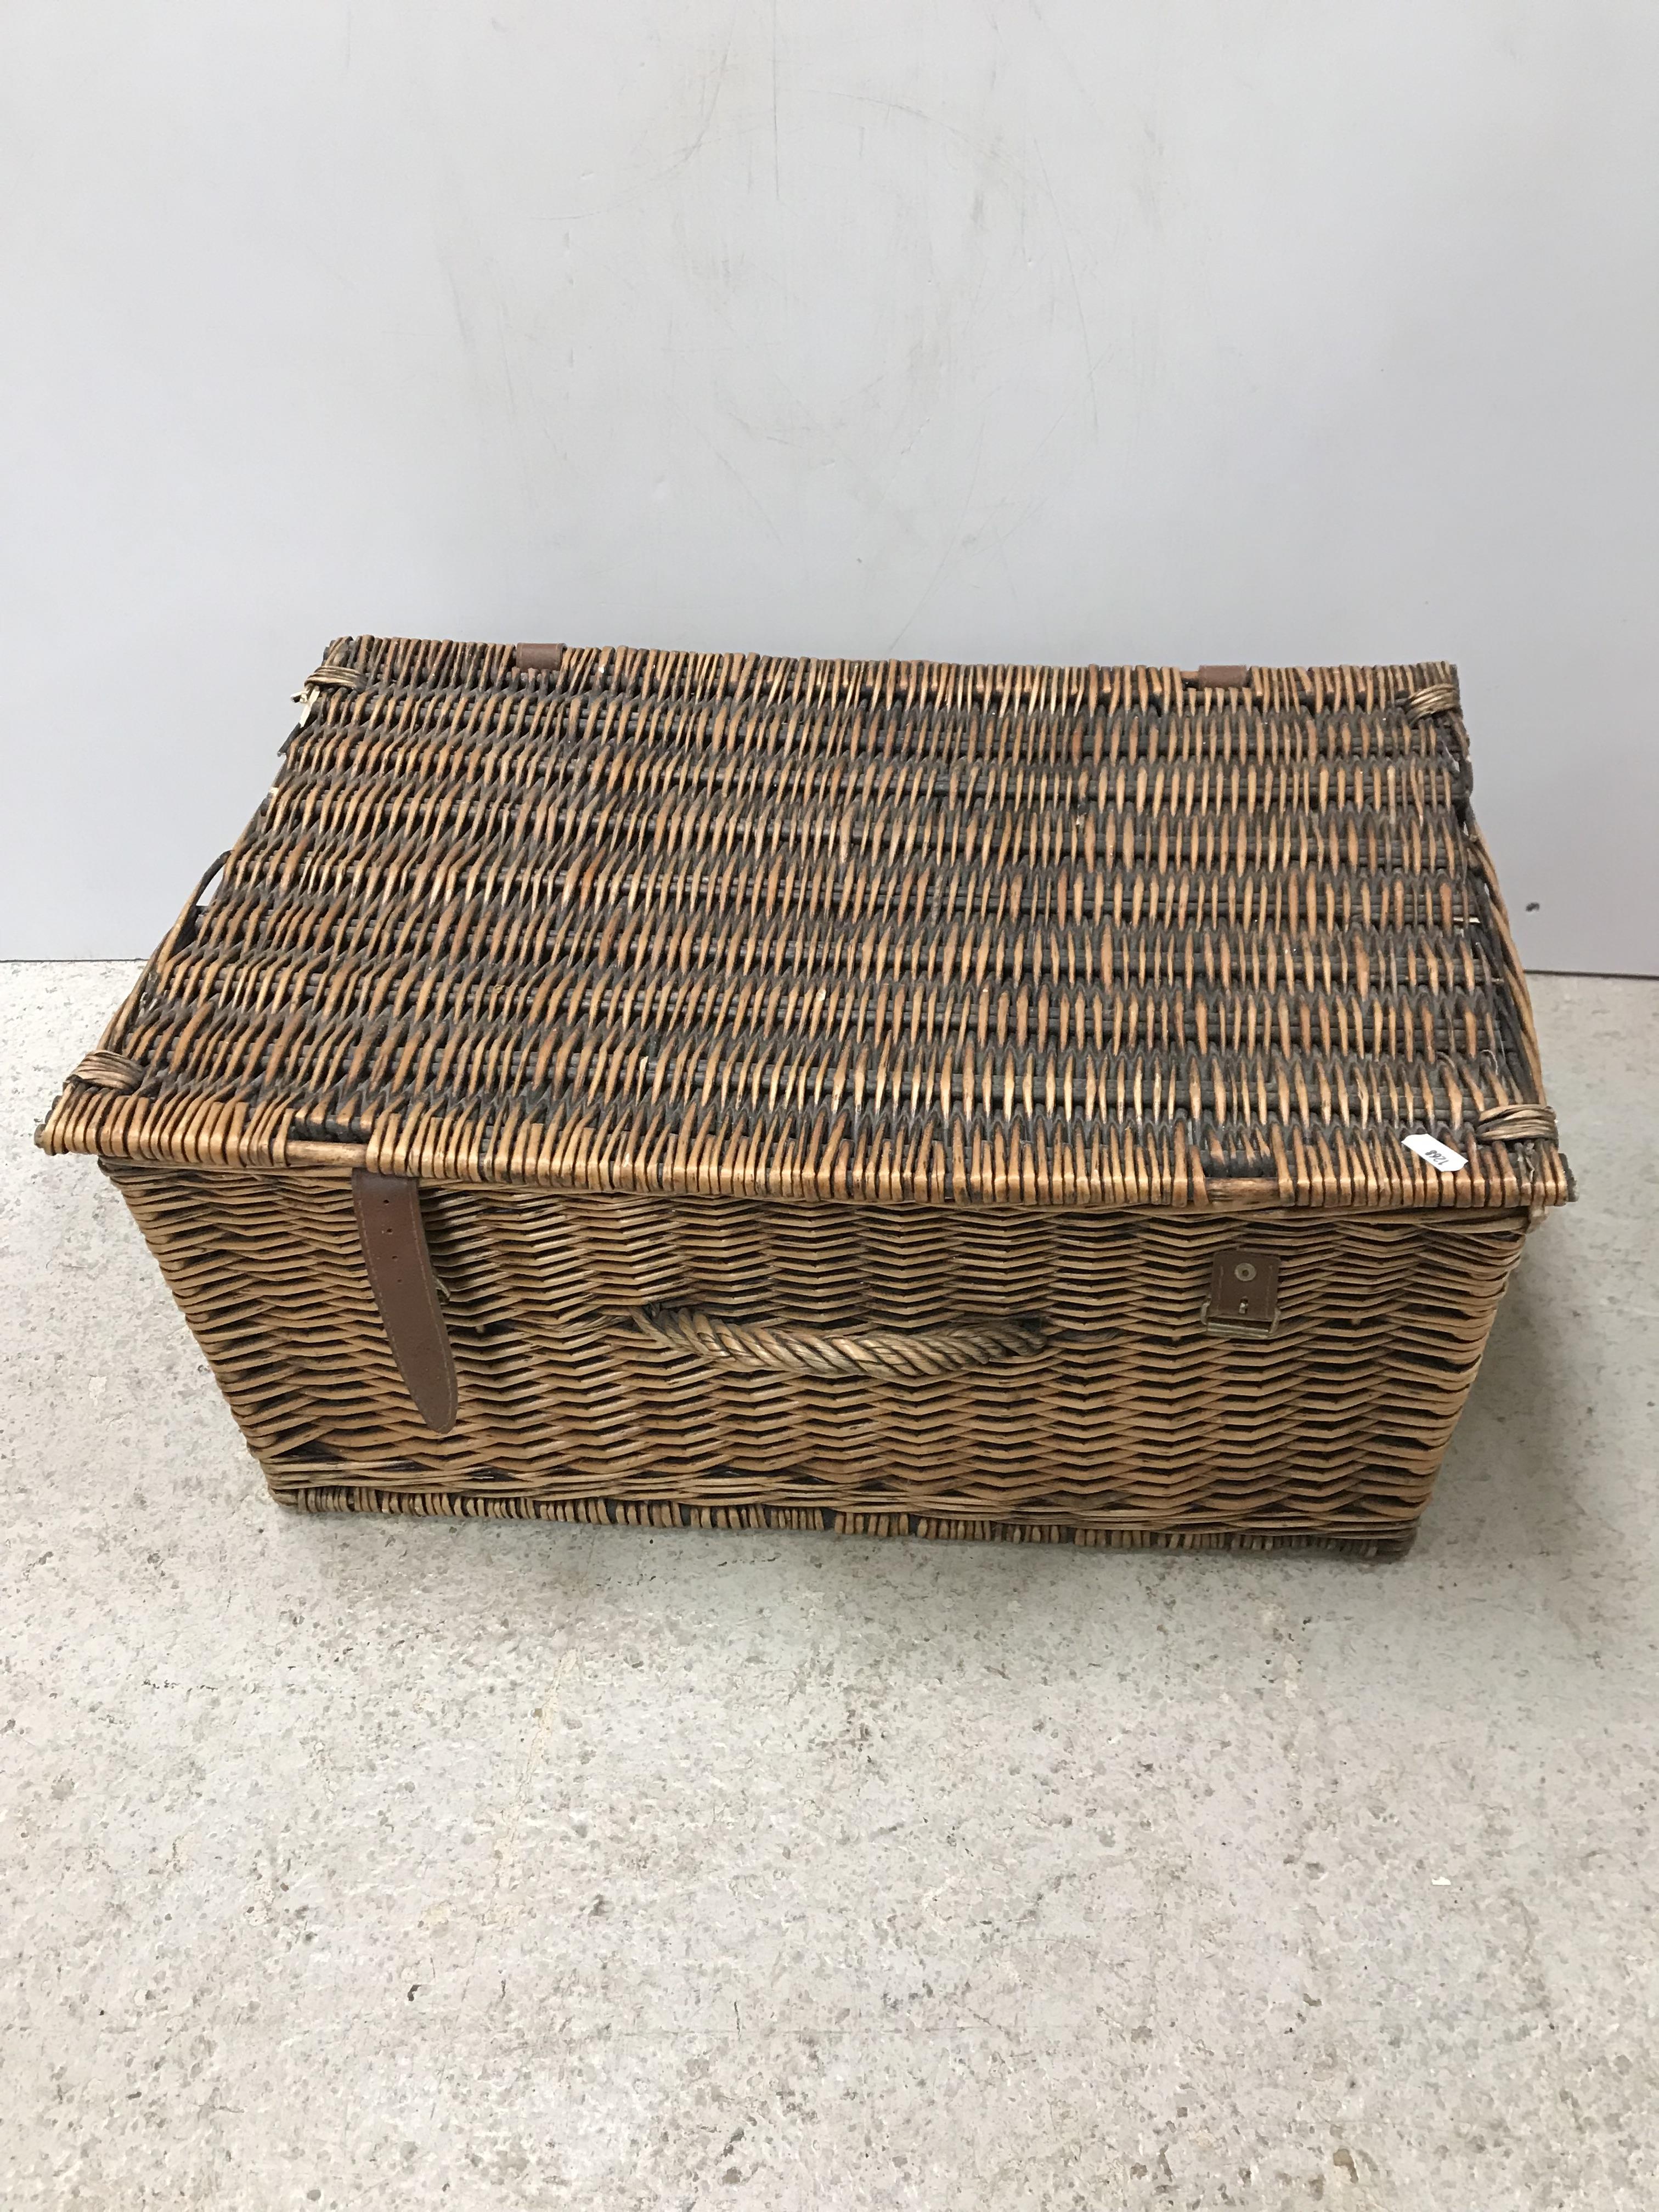 A collection of various wicker picnic and laundry hampers/baskets, - Image 2 of 7